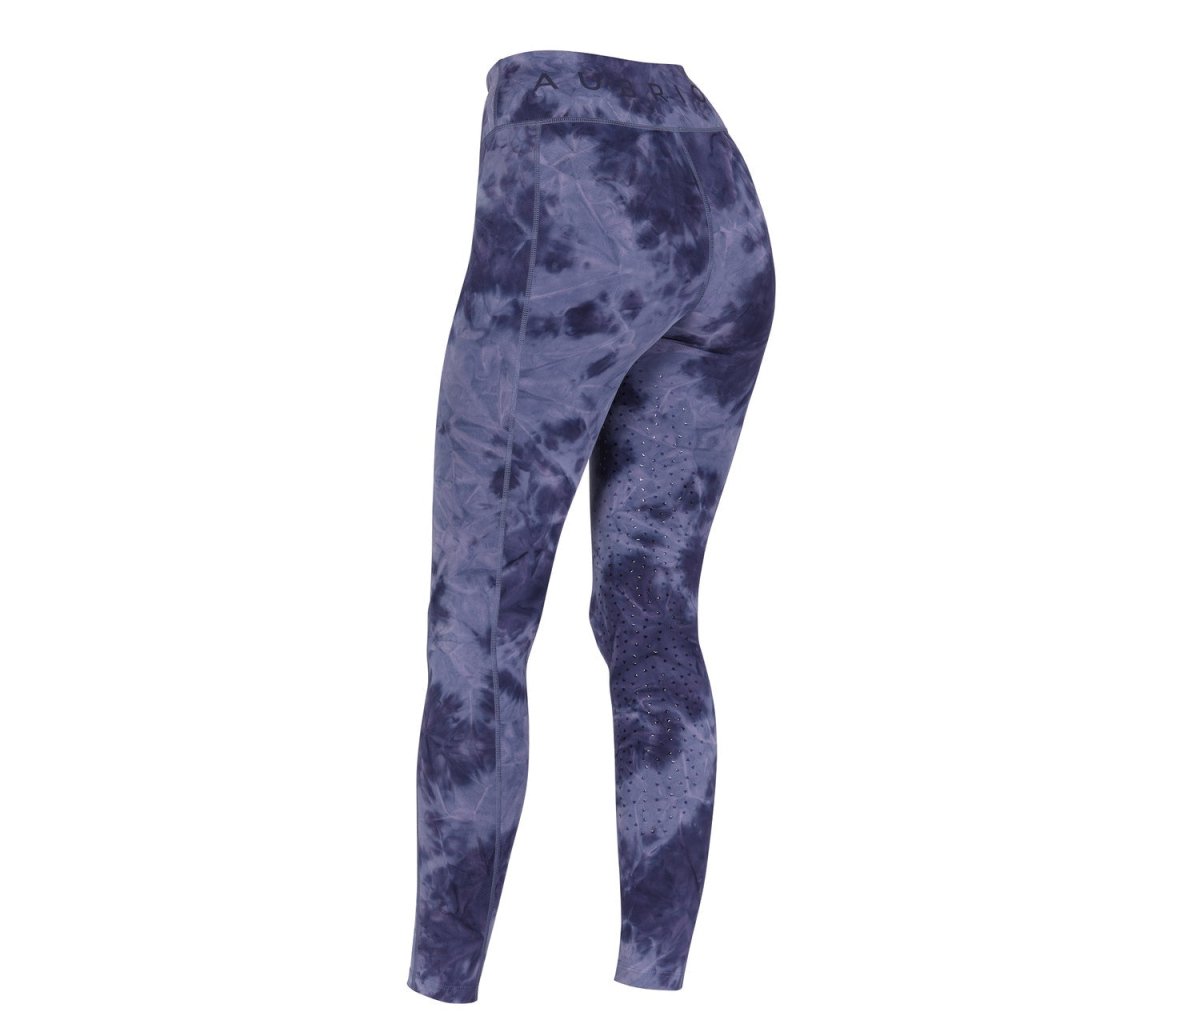 Aubrion SS24 Non-Stop Riding Tights - Navy TyeDye - L